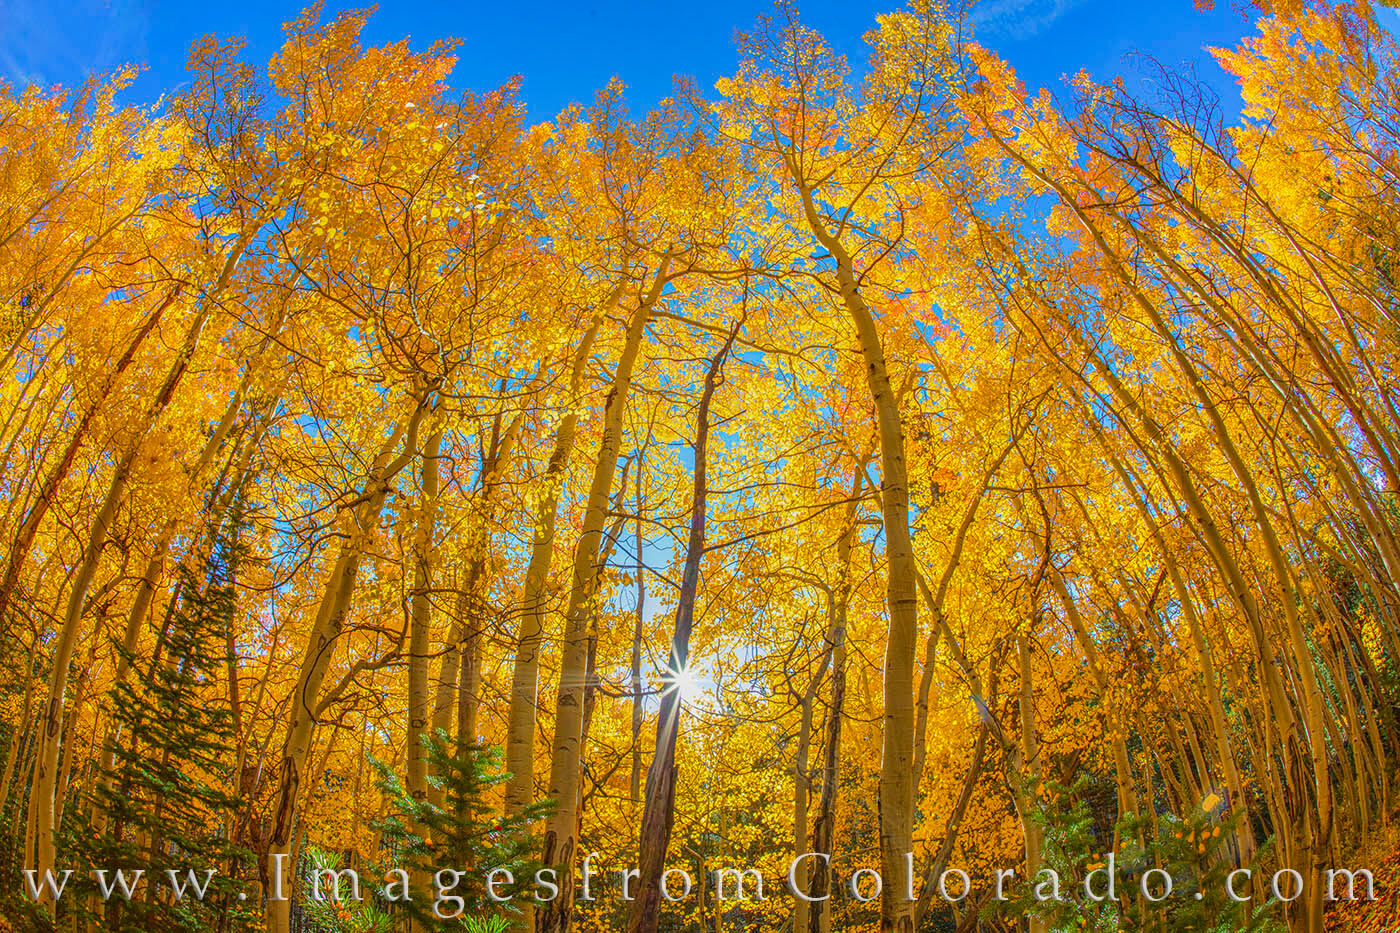 Taken with a fisheye lens, this image shows the beauty of golden fall aspen in the morning light as a sunburst spreads its rays...